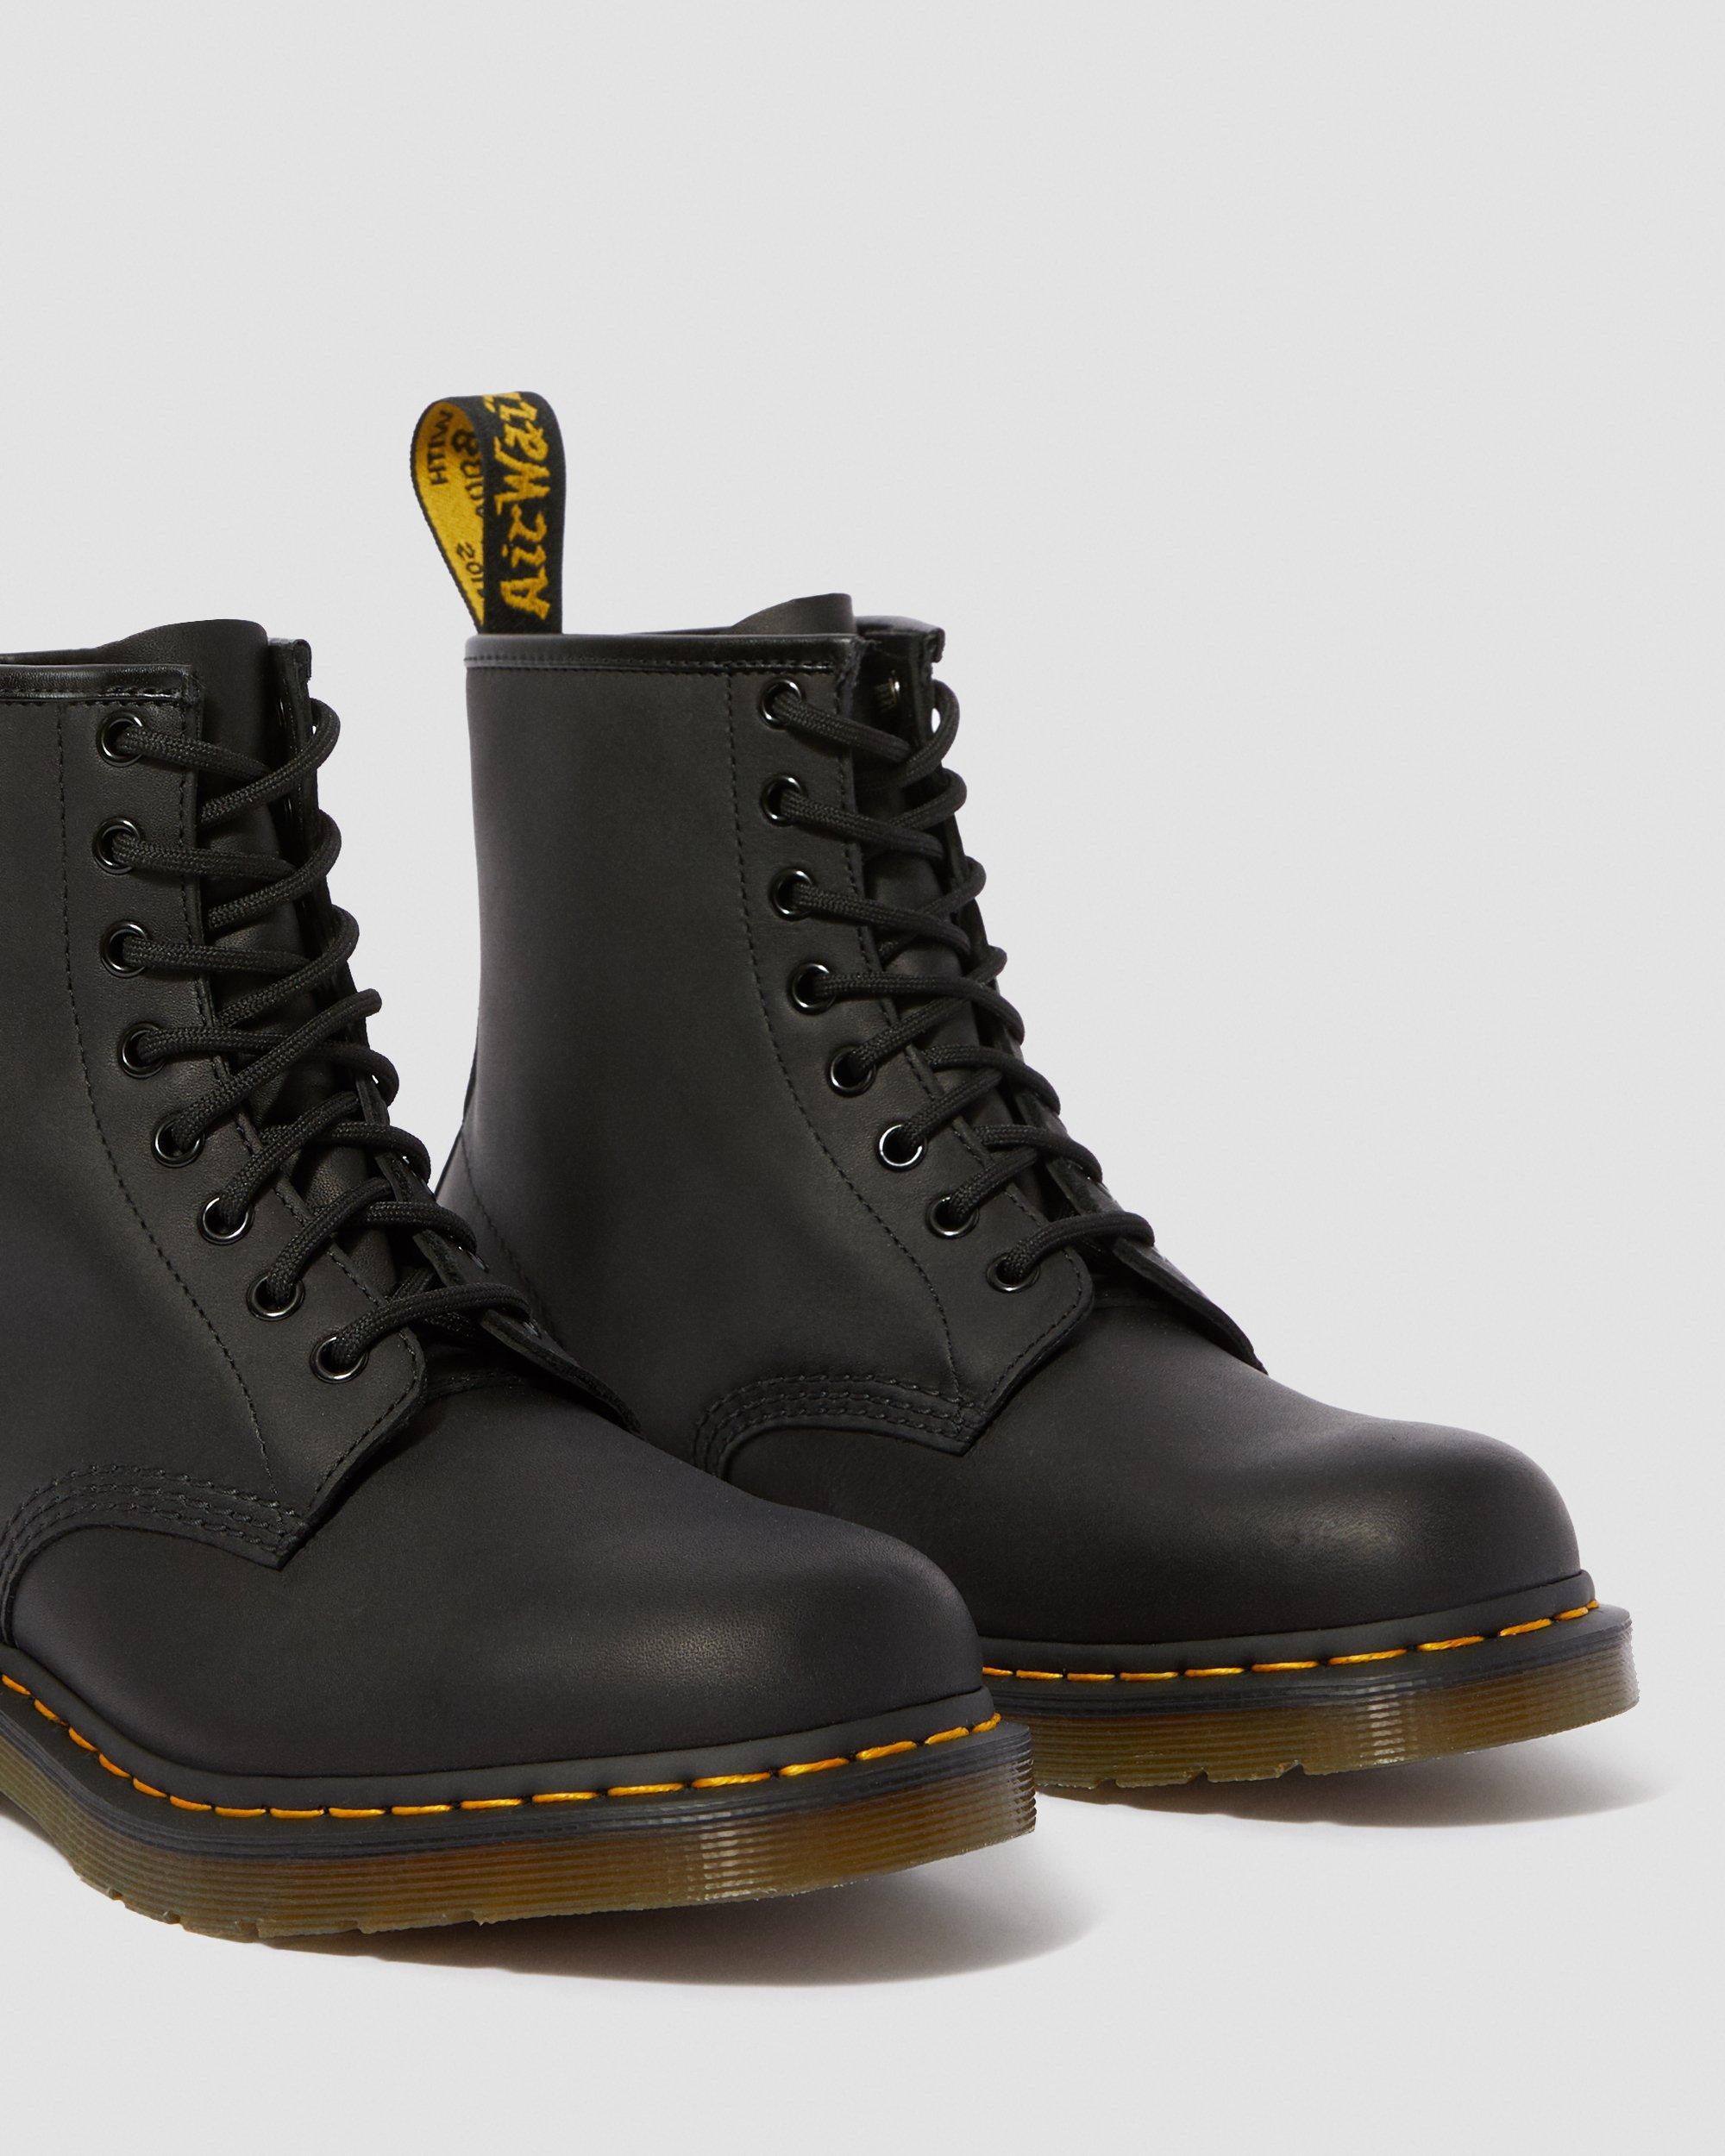 Dr. Martens 1460 Greasy Leather Lace Up Boots in Black - Lyst